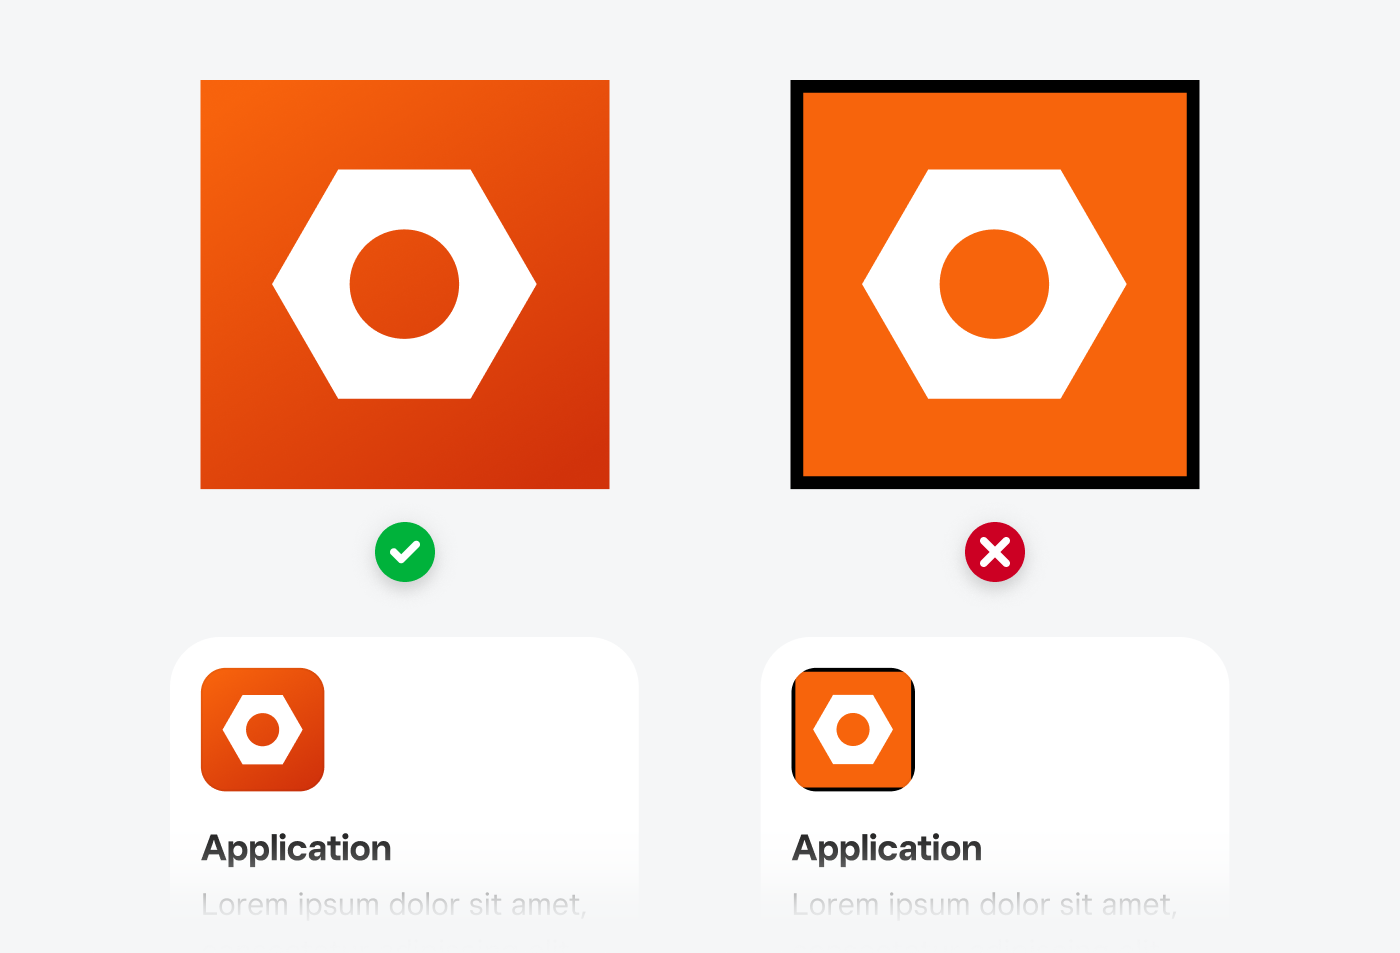 An image showing an app marketplace icon in two versions, without a border and with a border